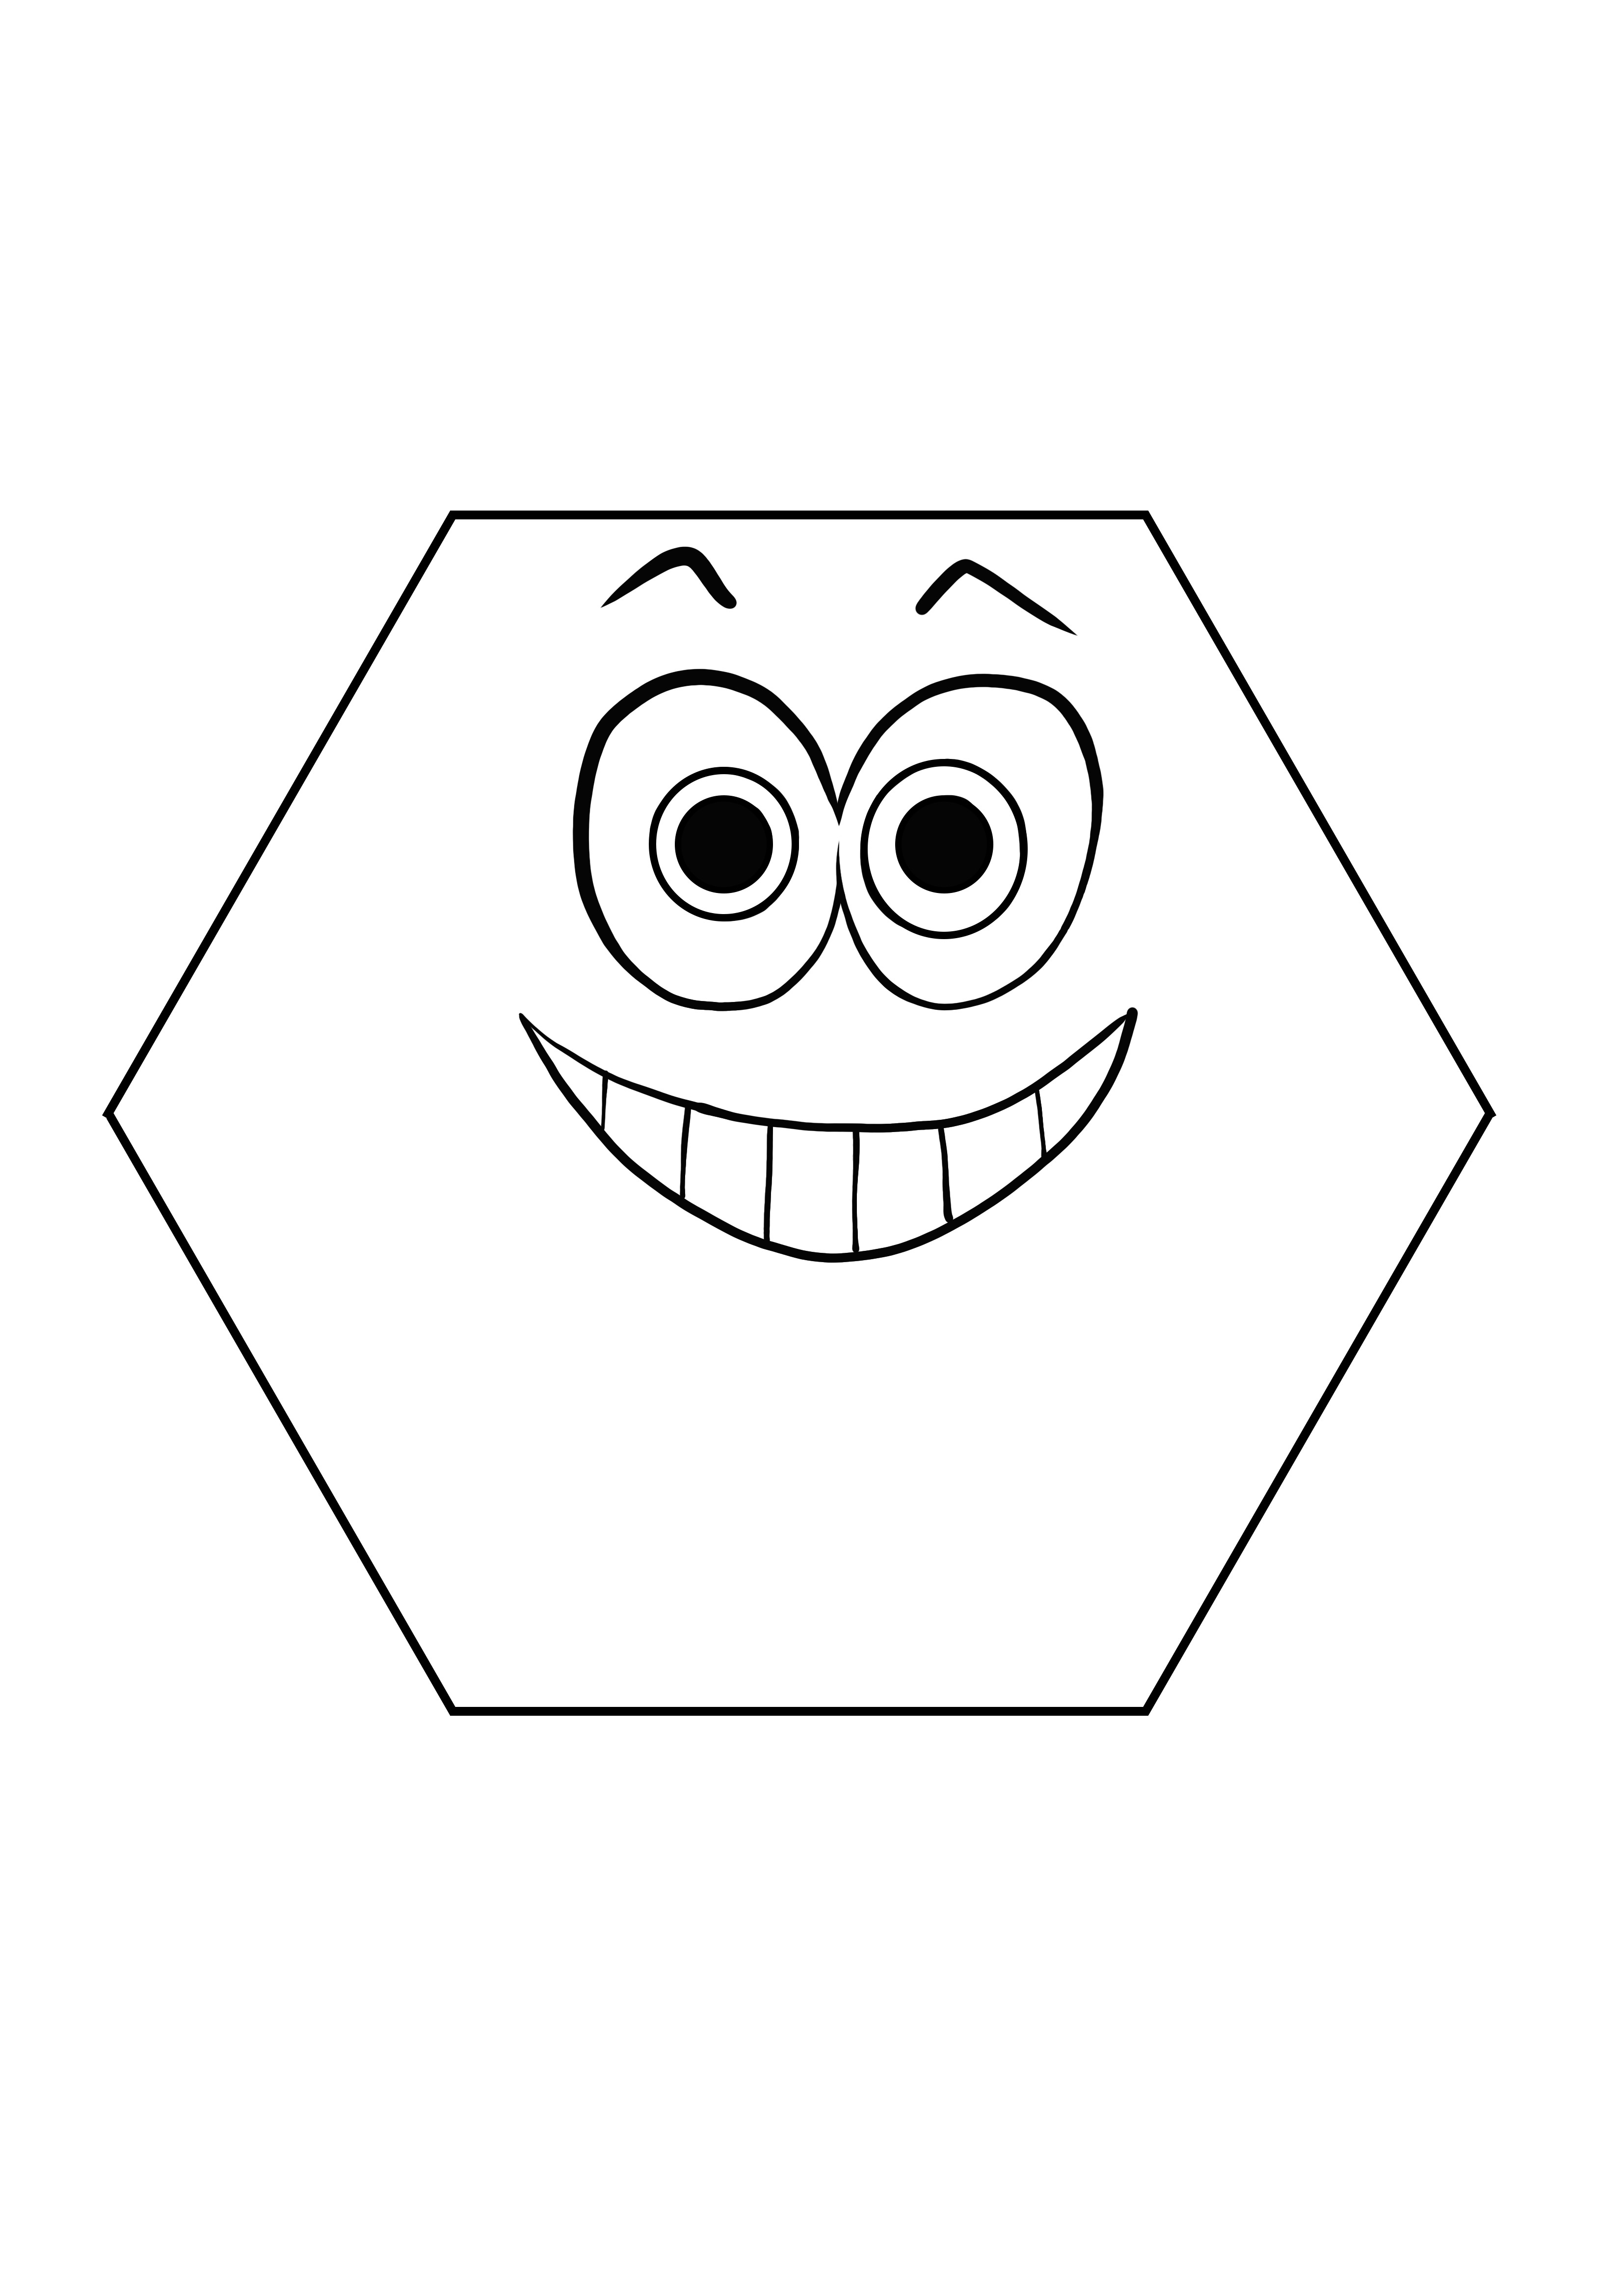 hexagon free printable and coloring page